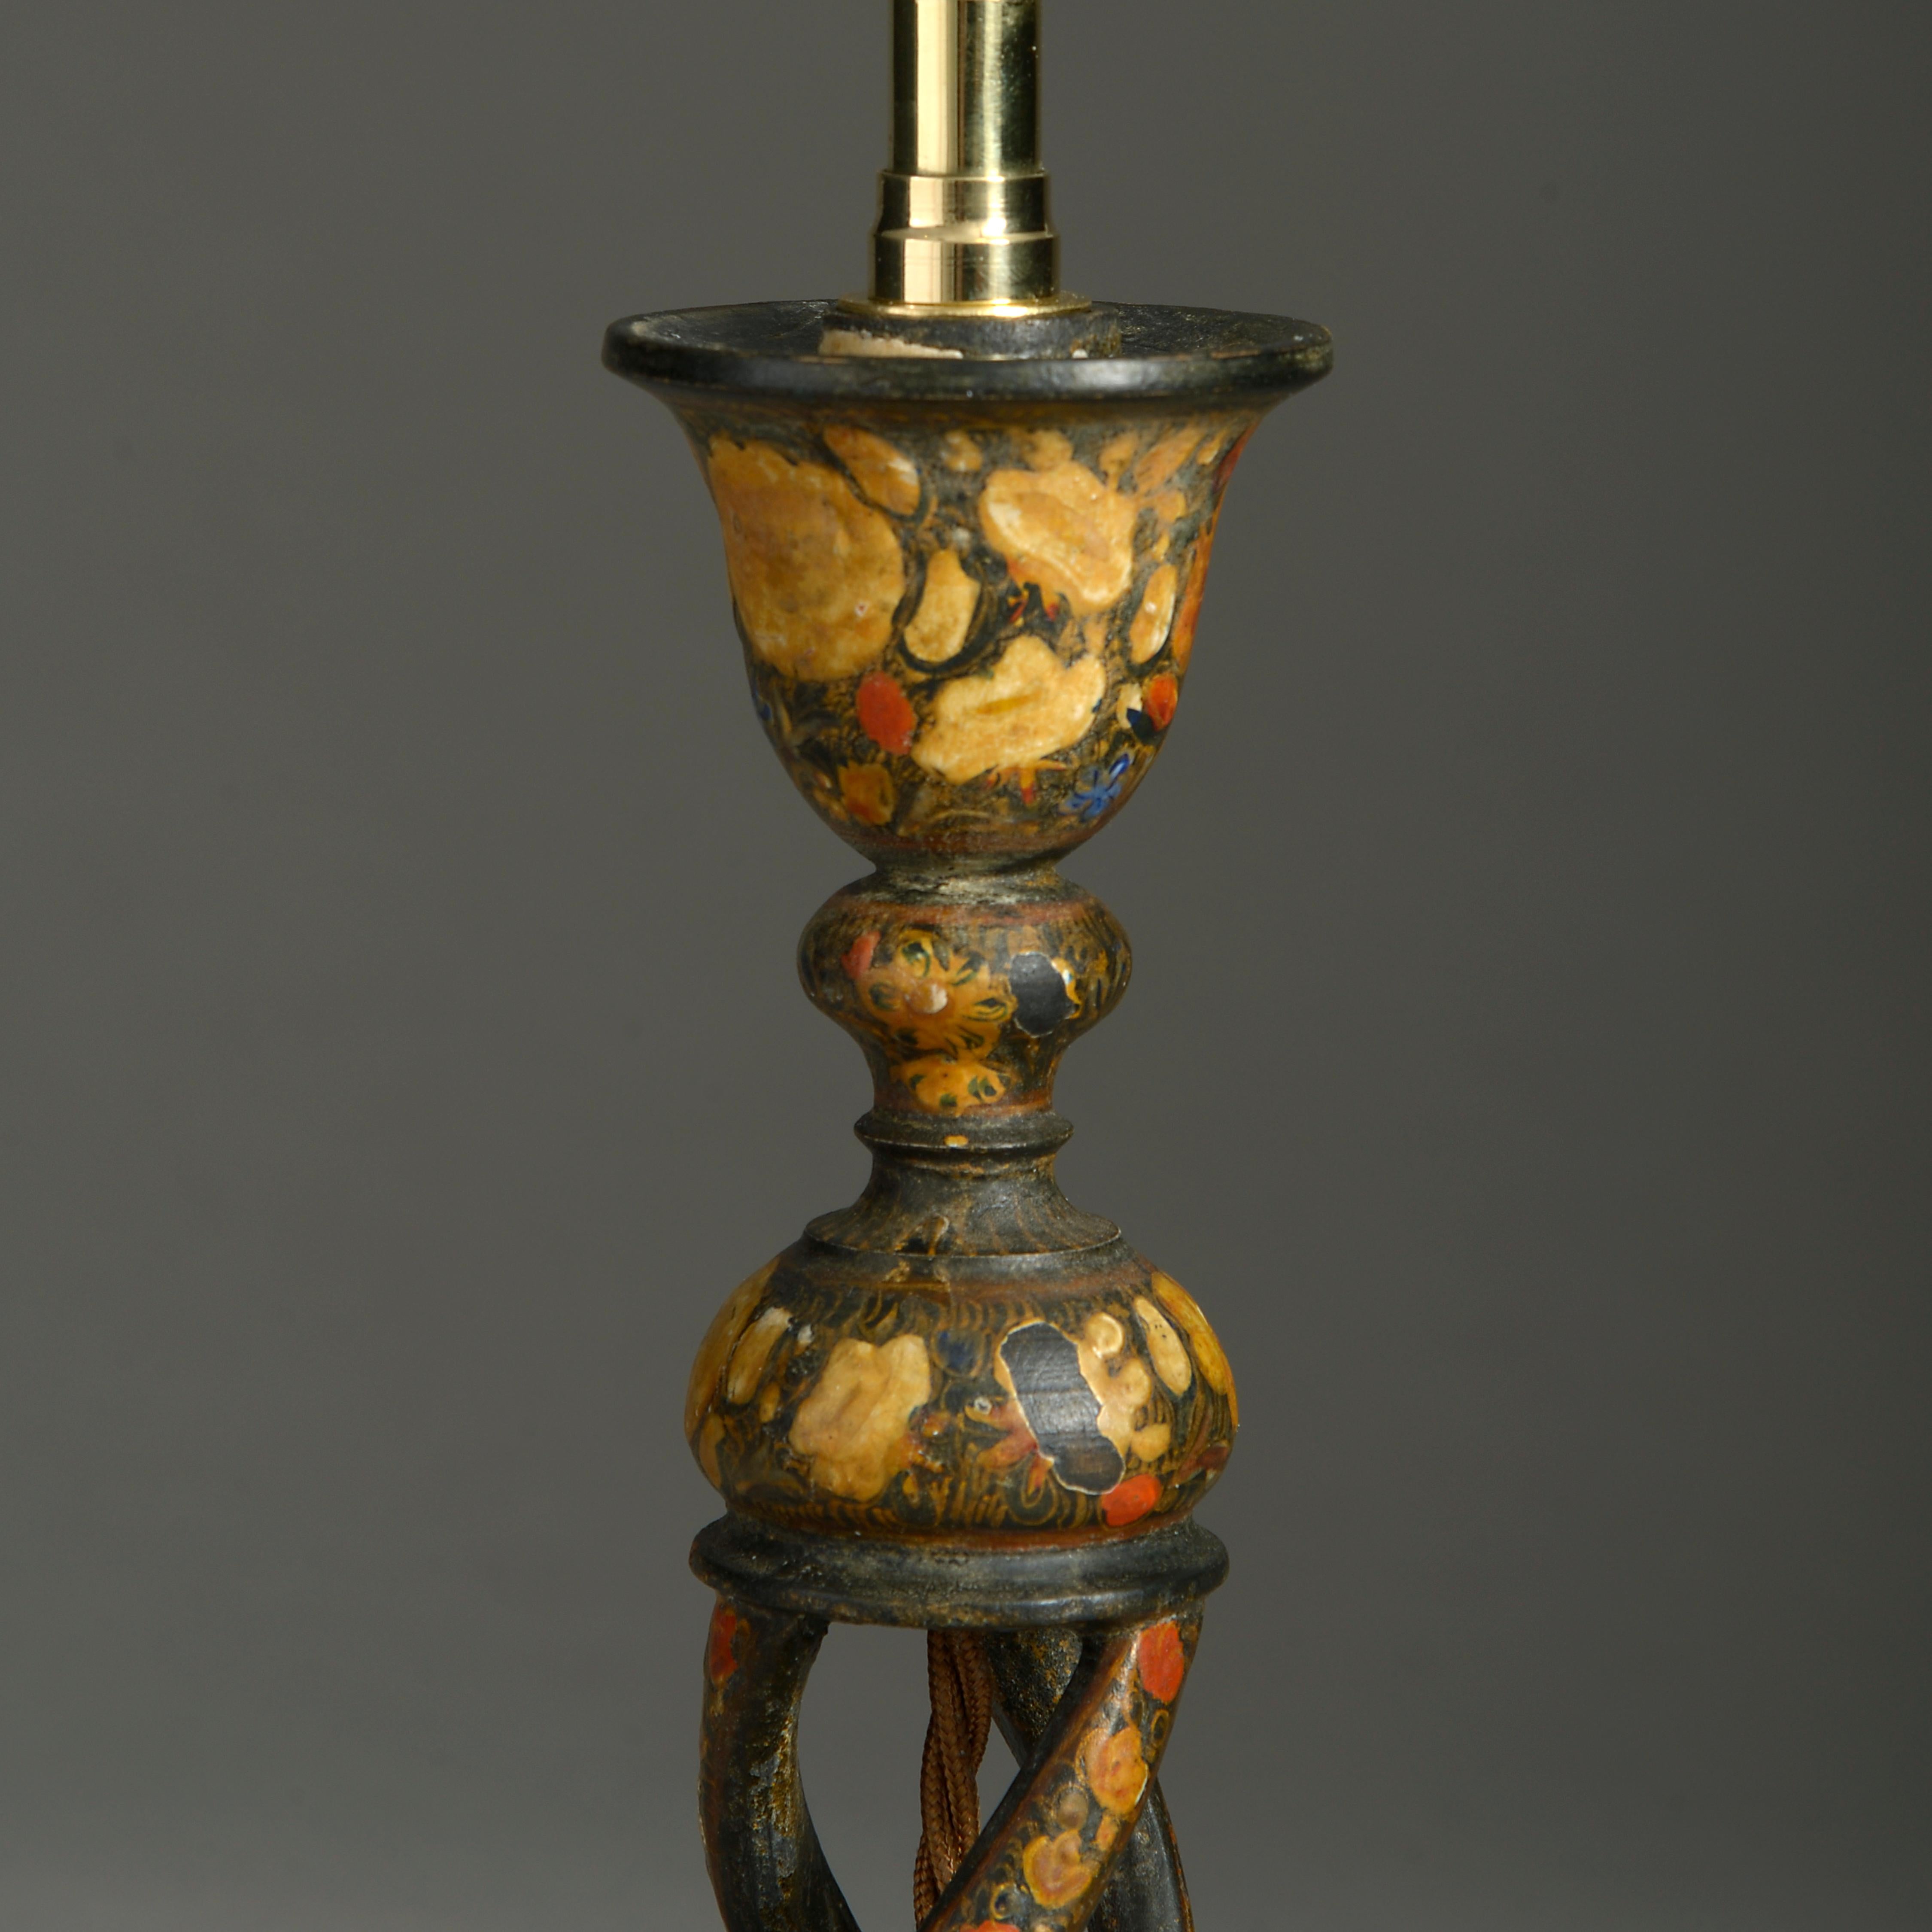 Anglo-Indian Early 20th Century Kashmiri Lacquer Lamp